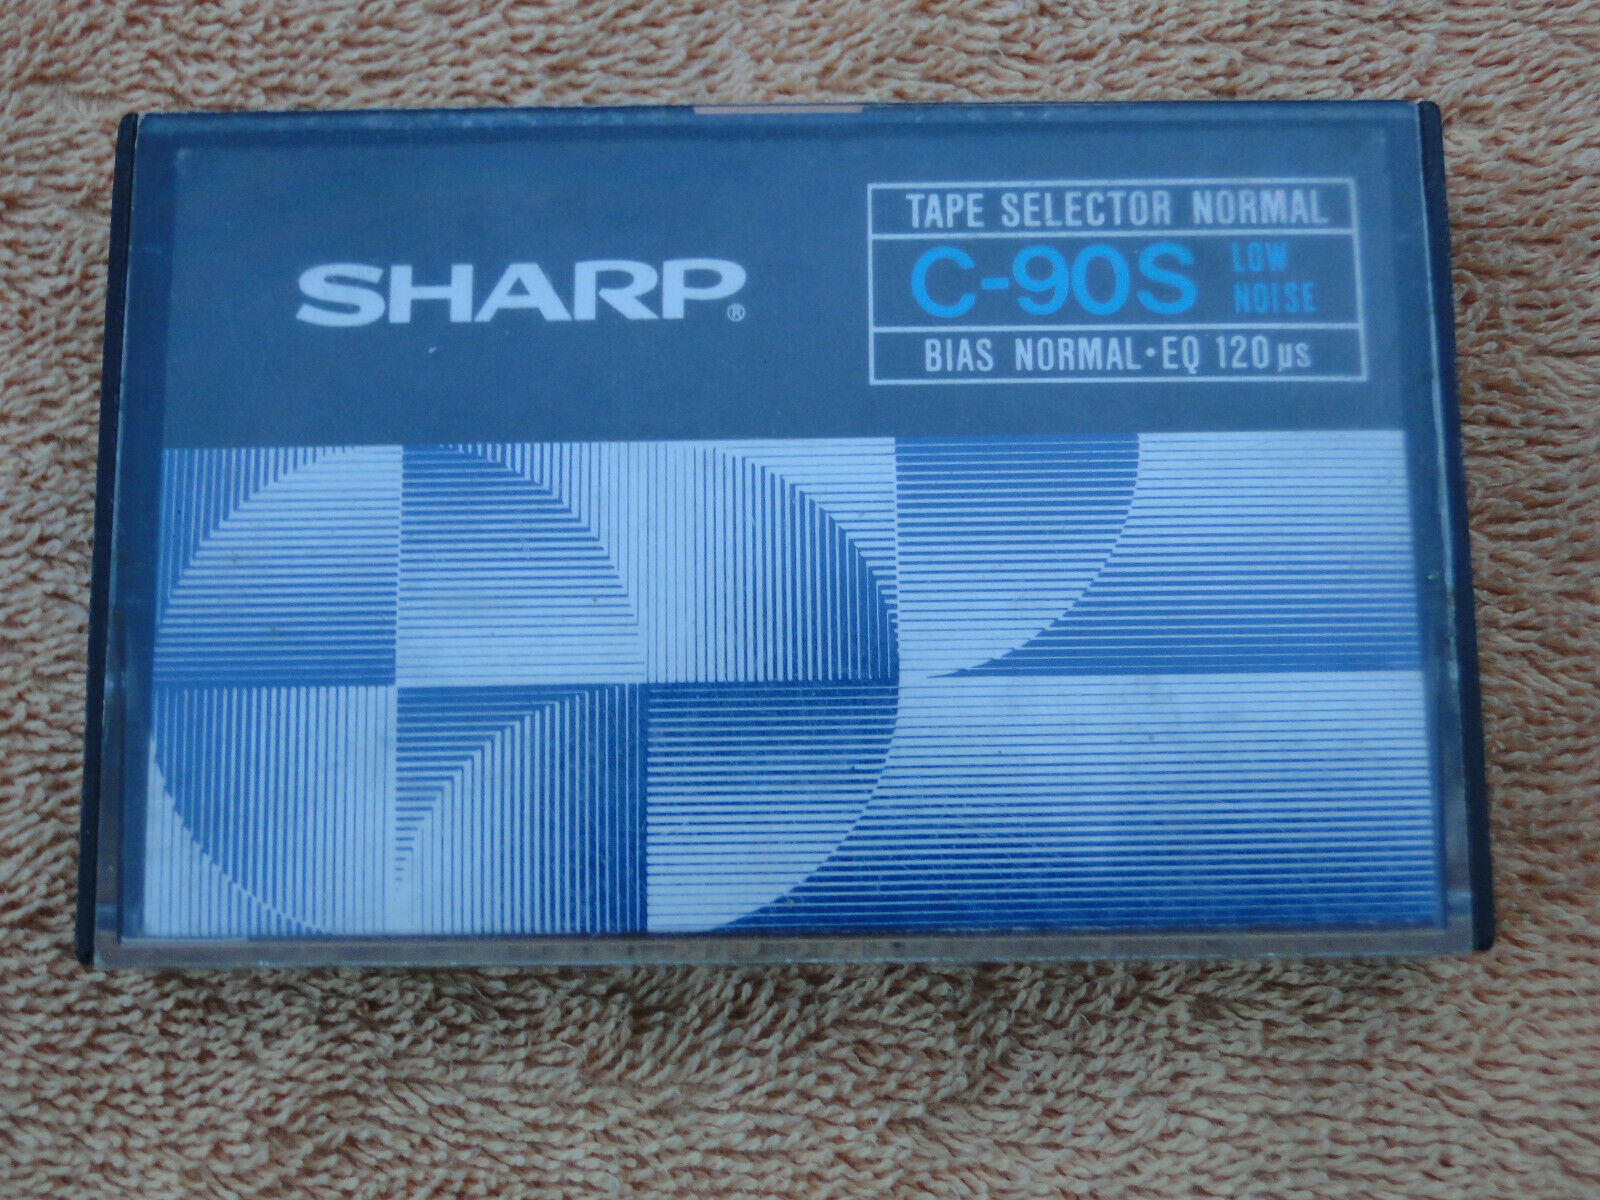 Vintage Rare Sharp C-90S Audio Cassette Tape Made In Japan About 1978 - $22.60